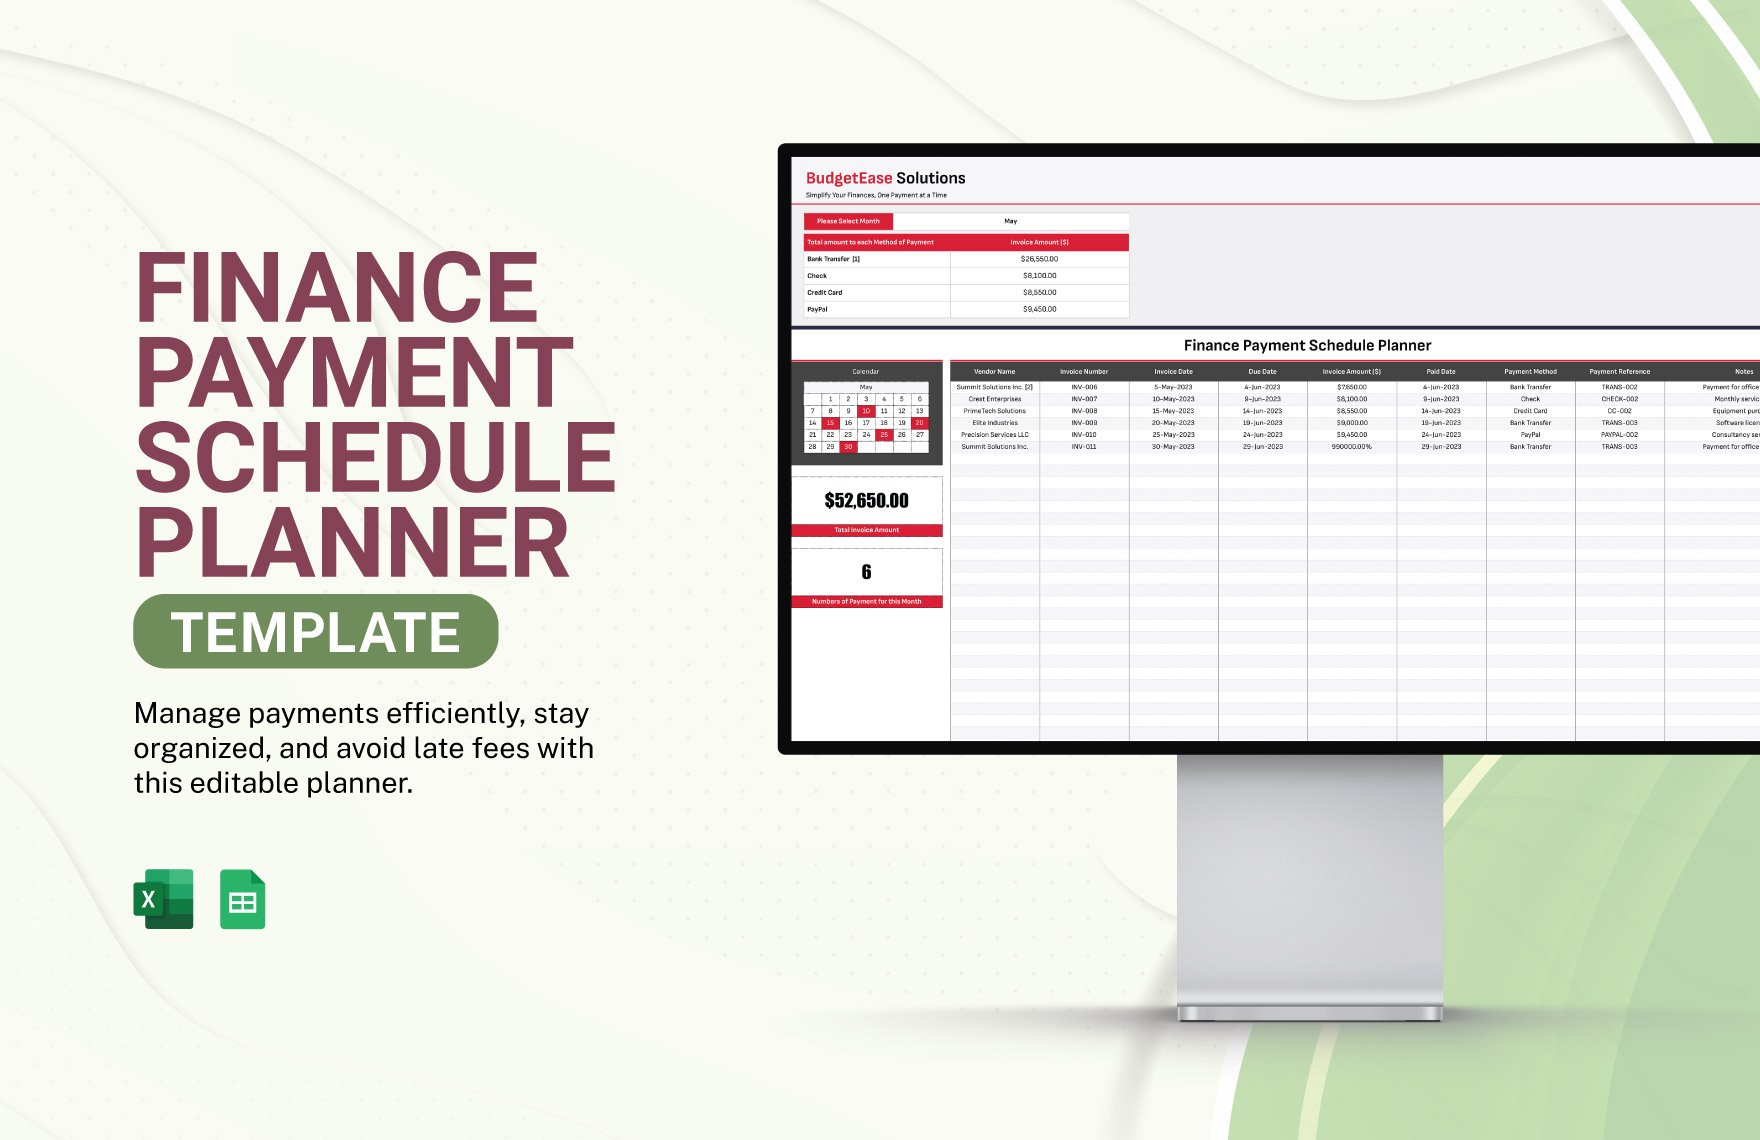 Finance Payment Schedule Planner Template in Excel, Google Sheets